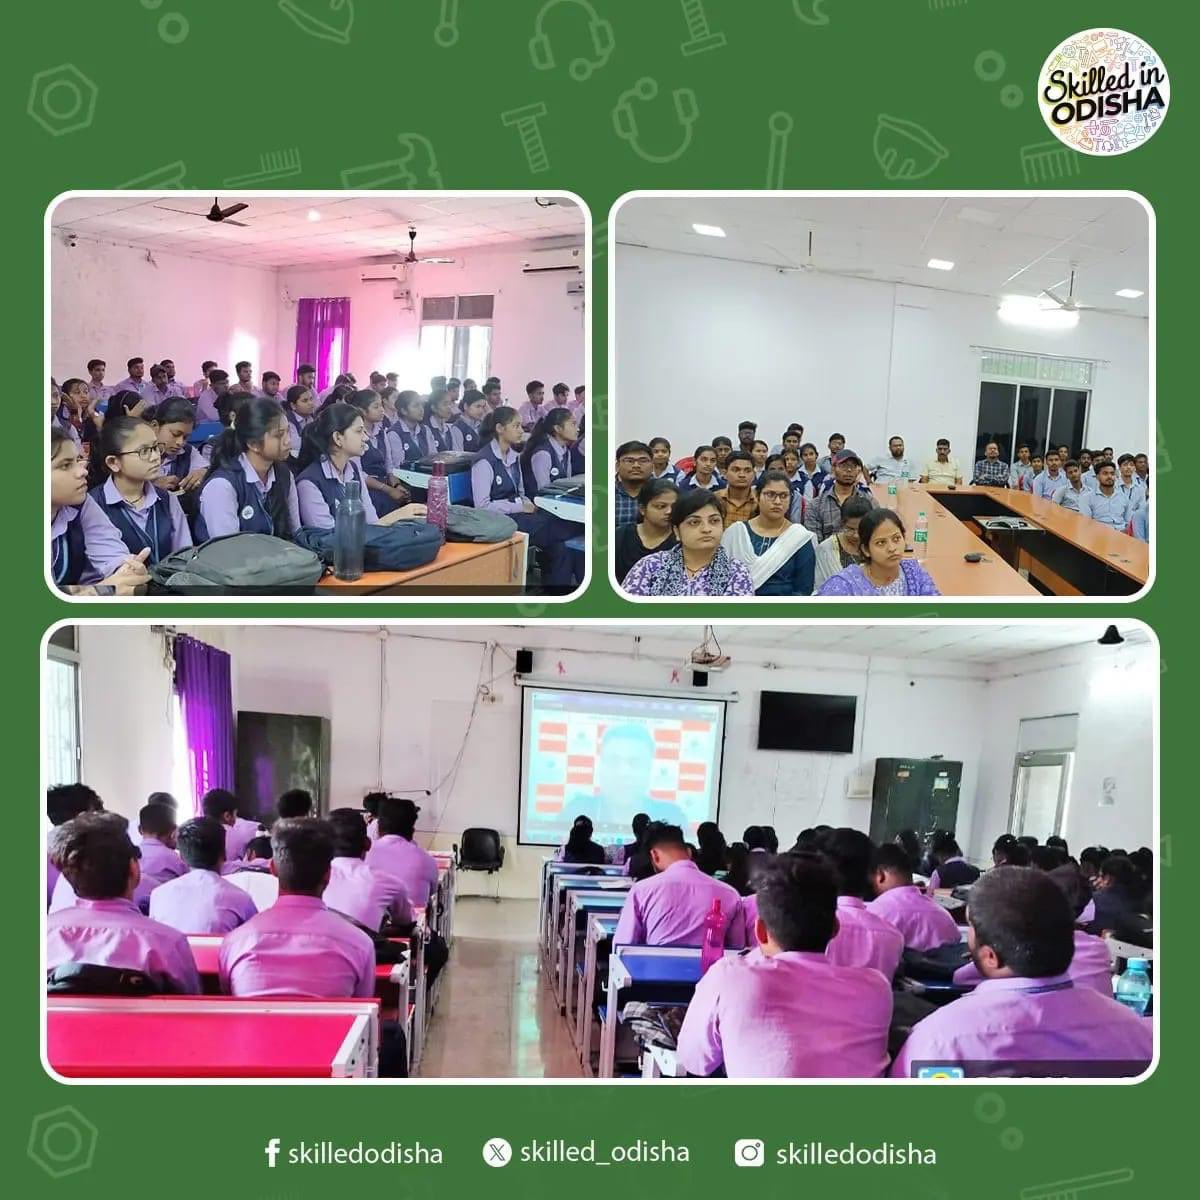 Yet another day, another milestone towards Computer Literacy. 
A session of Digital Skilling by Mr Naresh Arya (Chairman, Unitech) and Mr. Harsh Arya (Director, Unitech) for all technical colleges of Odisha! 
Attended by 1500+ students.
#computerliteracy #34yearsoflegacy